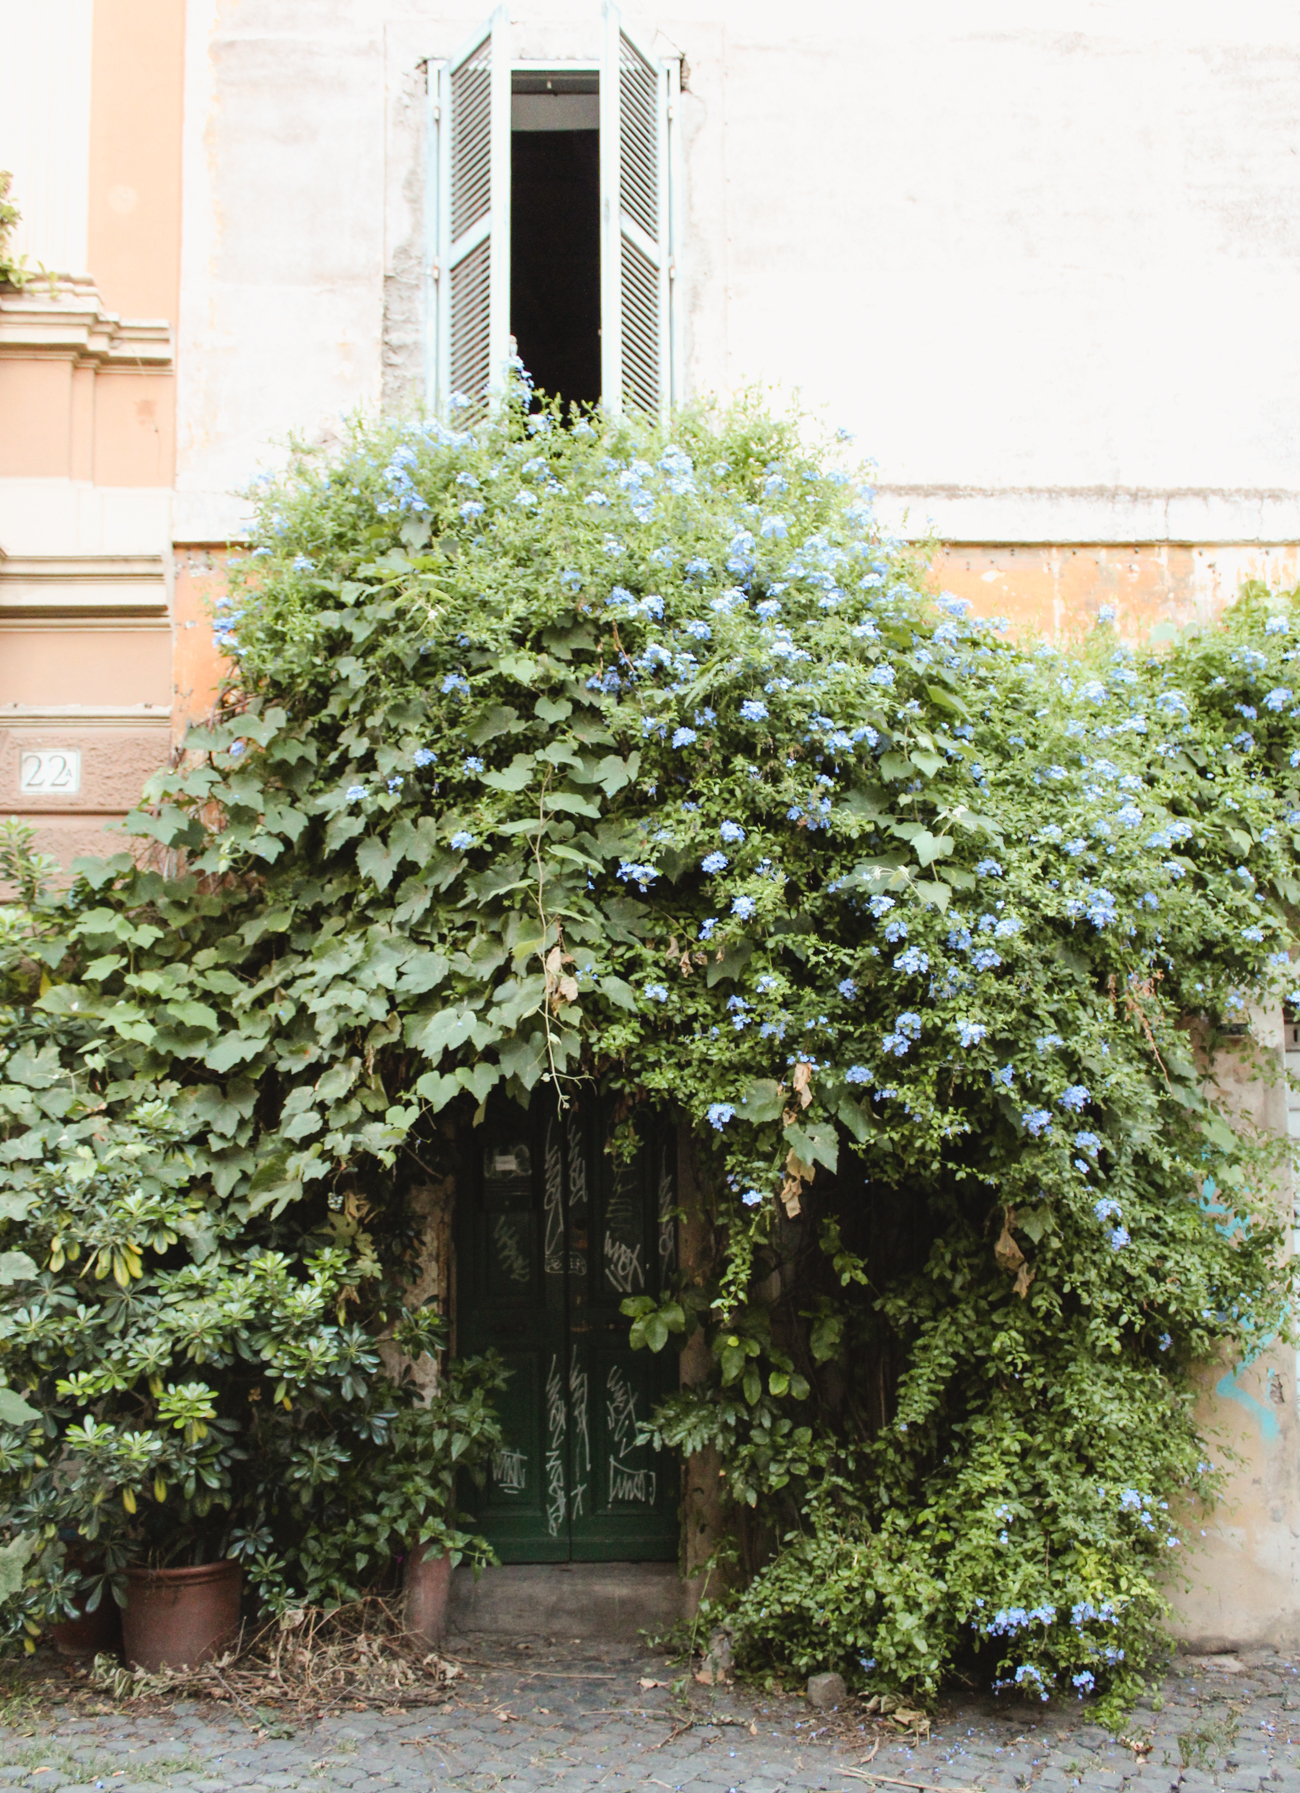 25 things you must do in Rome, Italy- Trastevere 